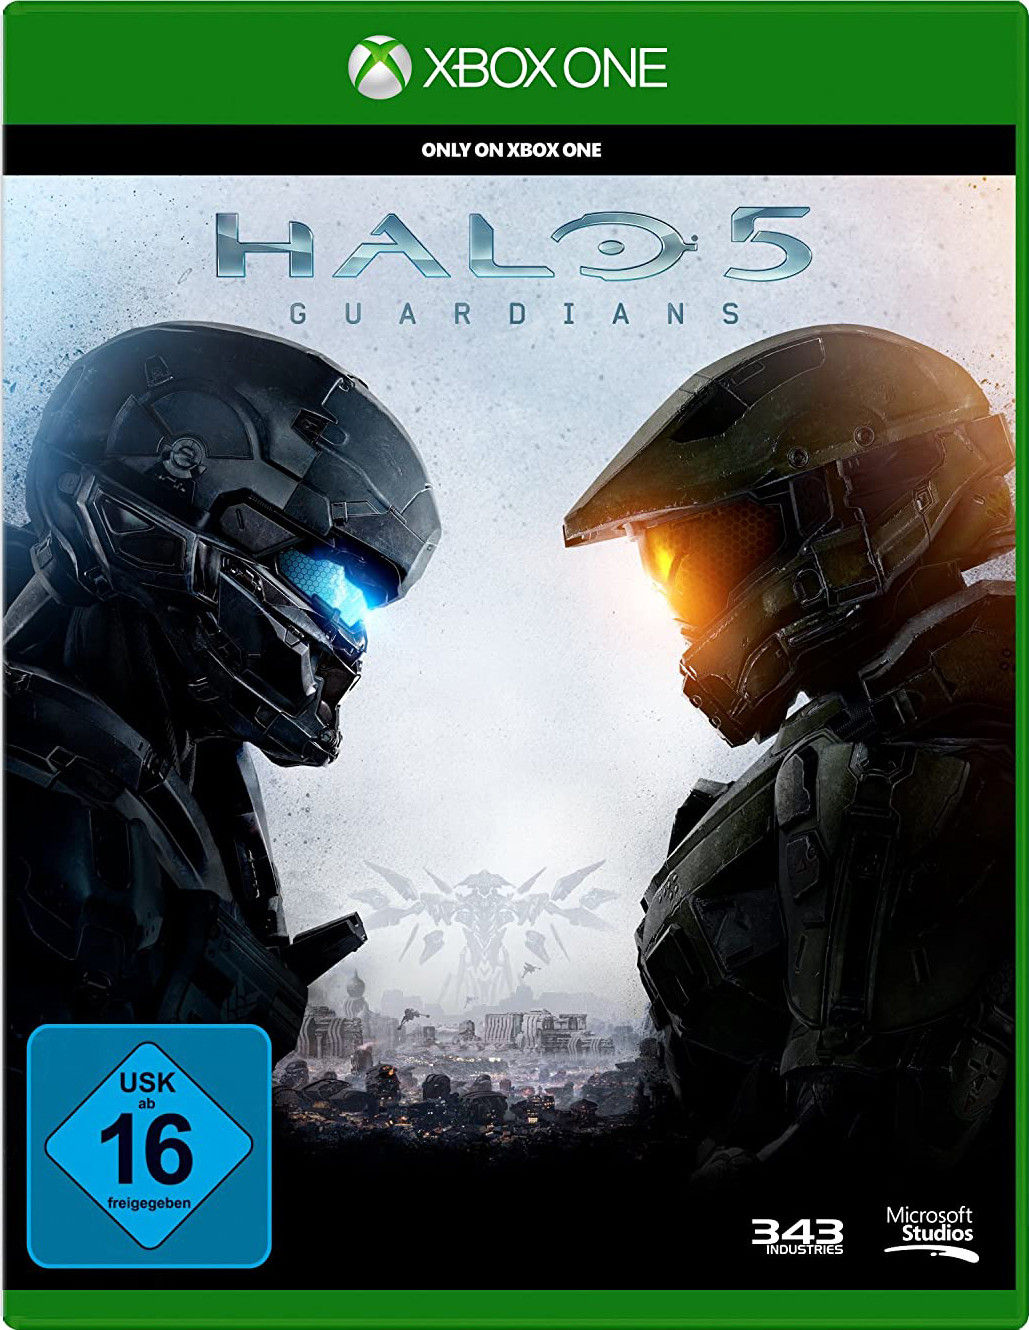 halo-5-guardians-verpakking-duits-game-engels-xbox-one